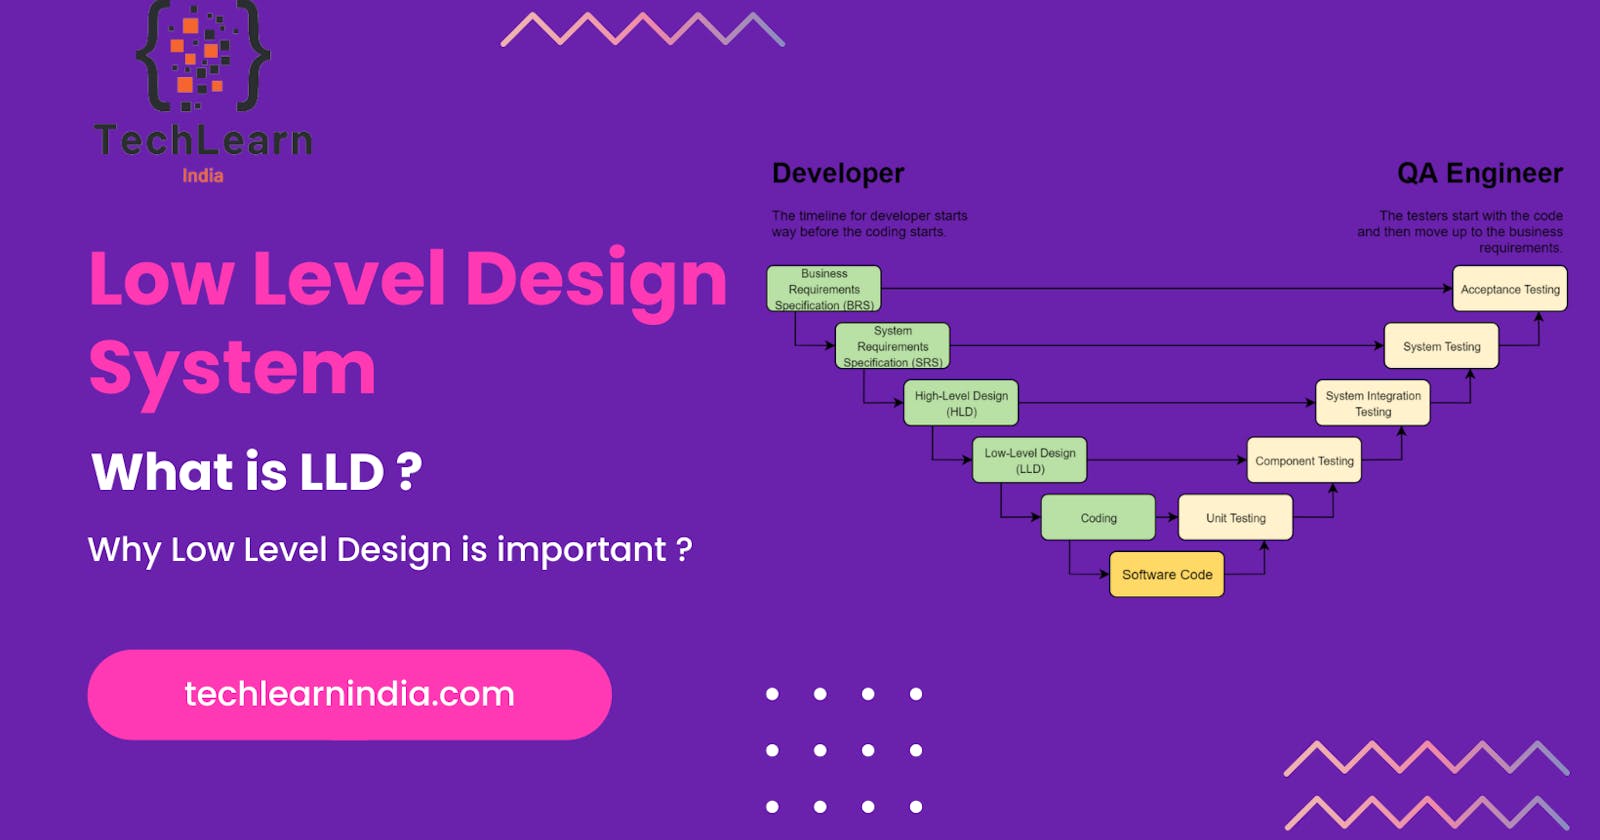 What is Low Level Design ( LLD) System ?